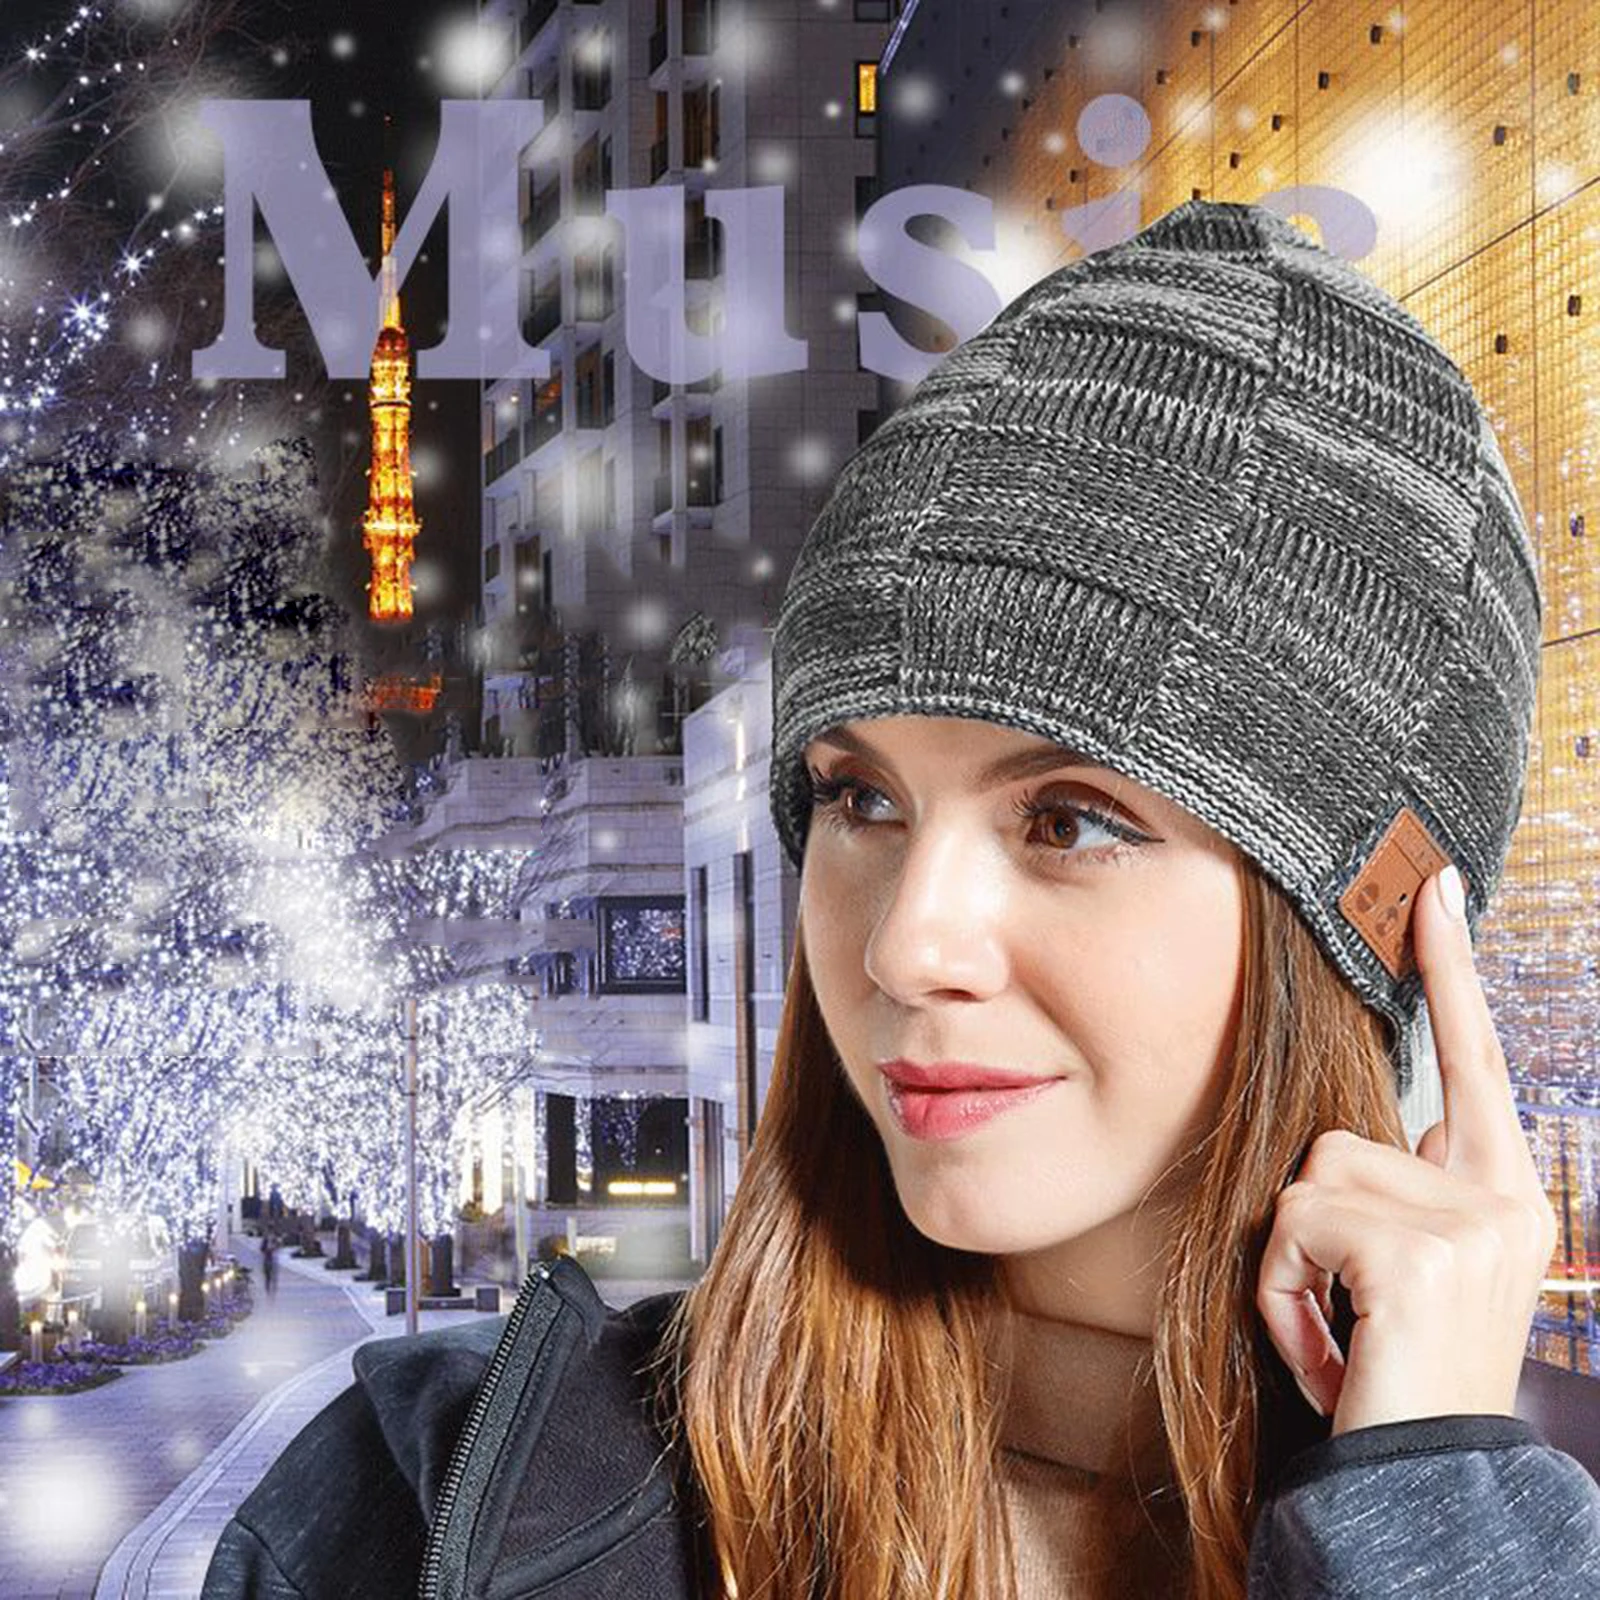 Bluetooth Beanie for Men Women,Music Winter Hat with Warm Fleece Lining for Outdoor, Unique Birthday Tech Gifts